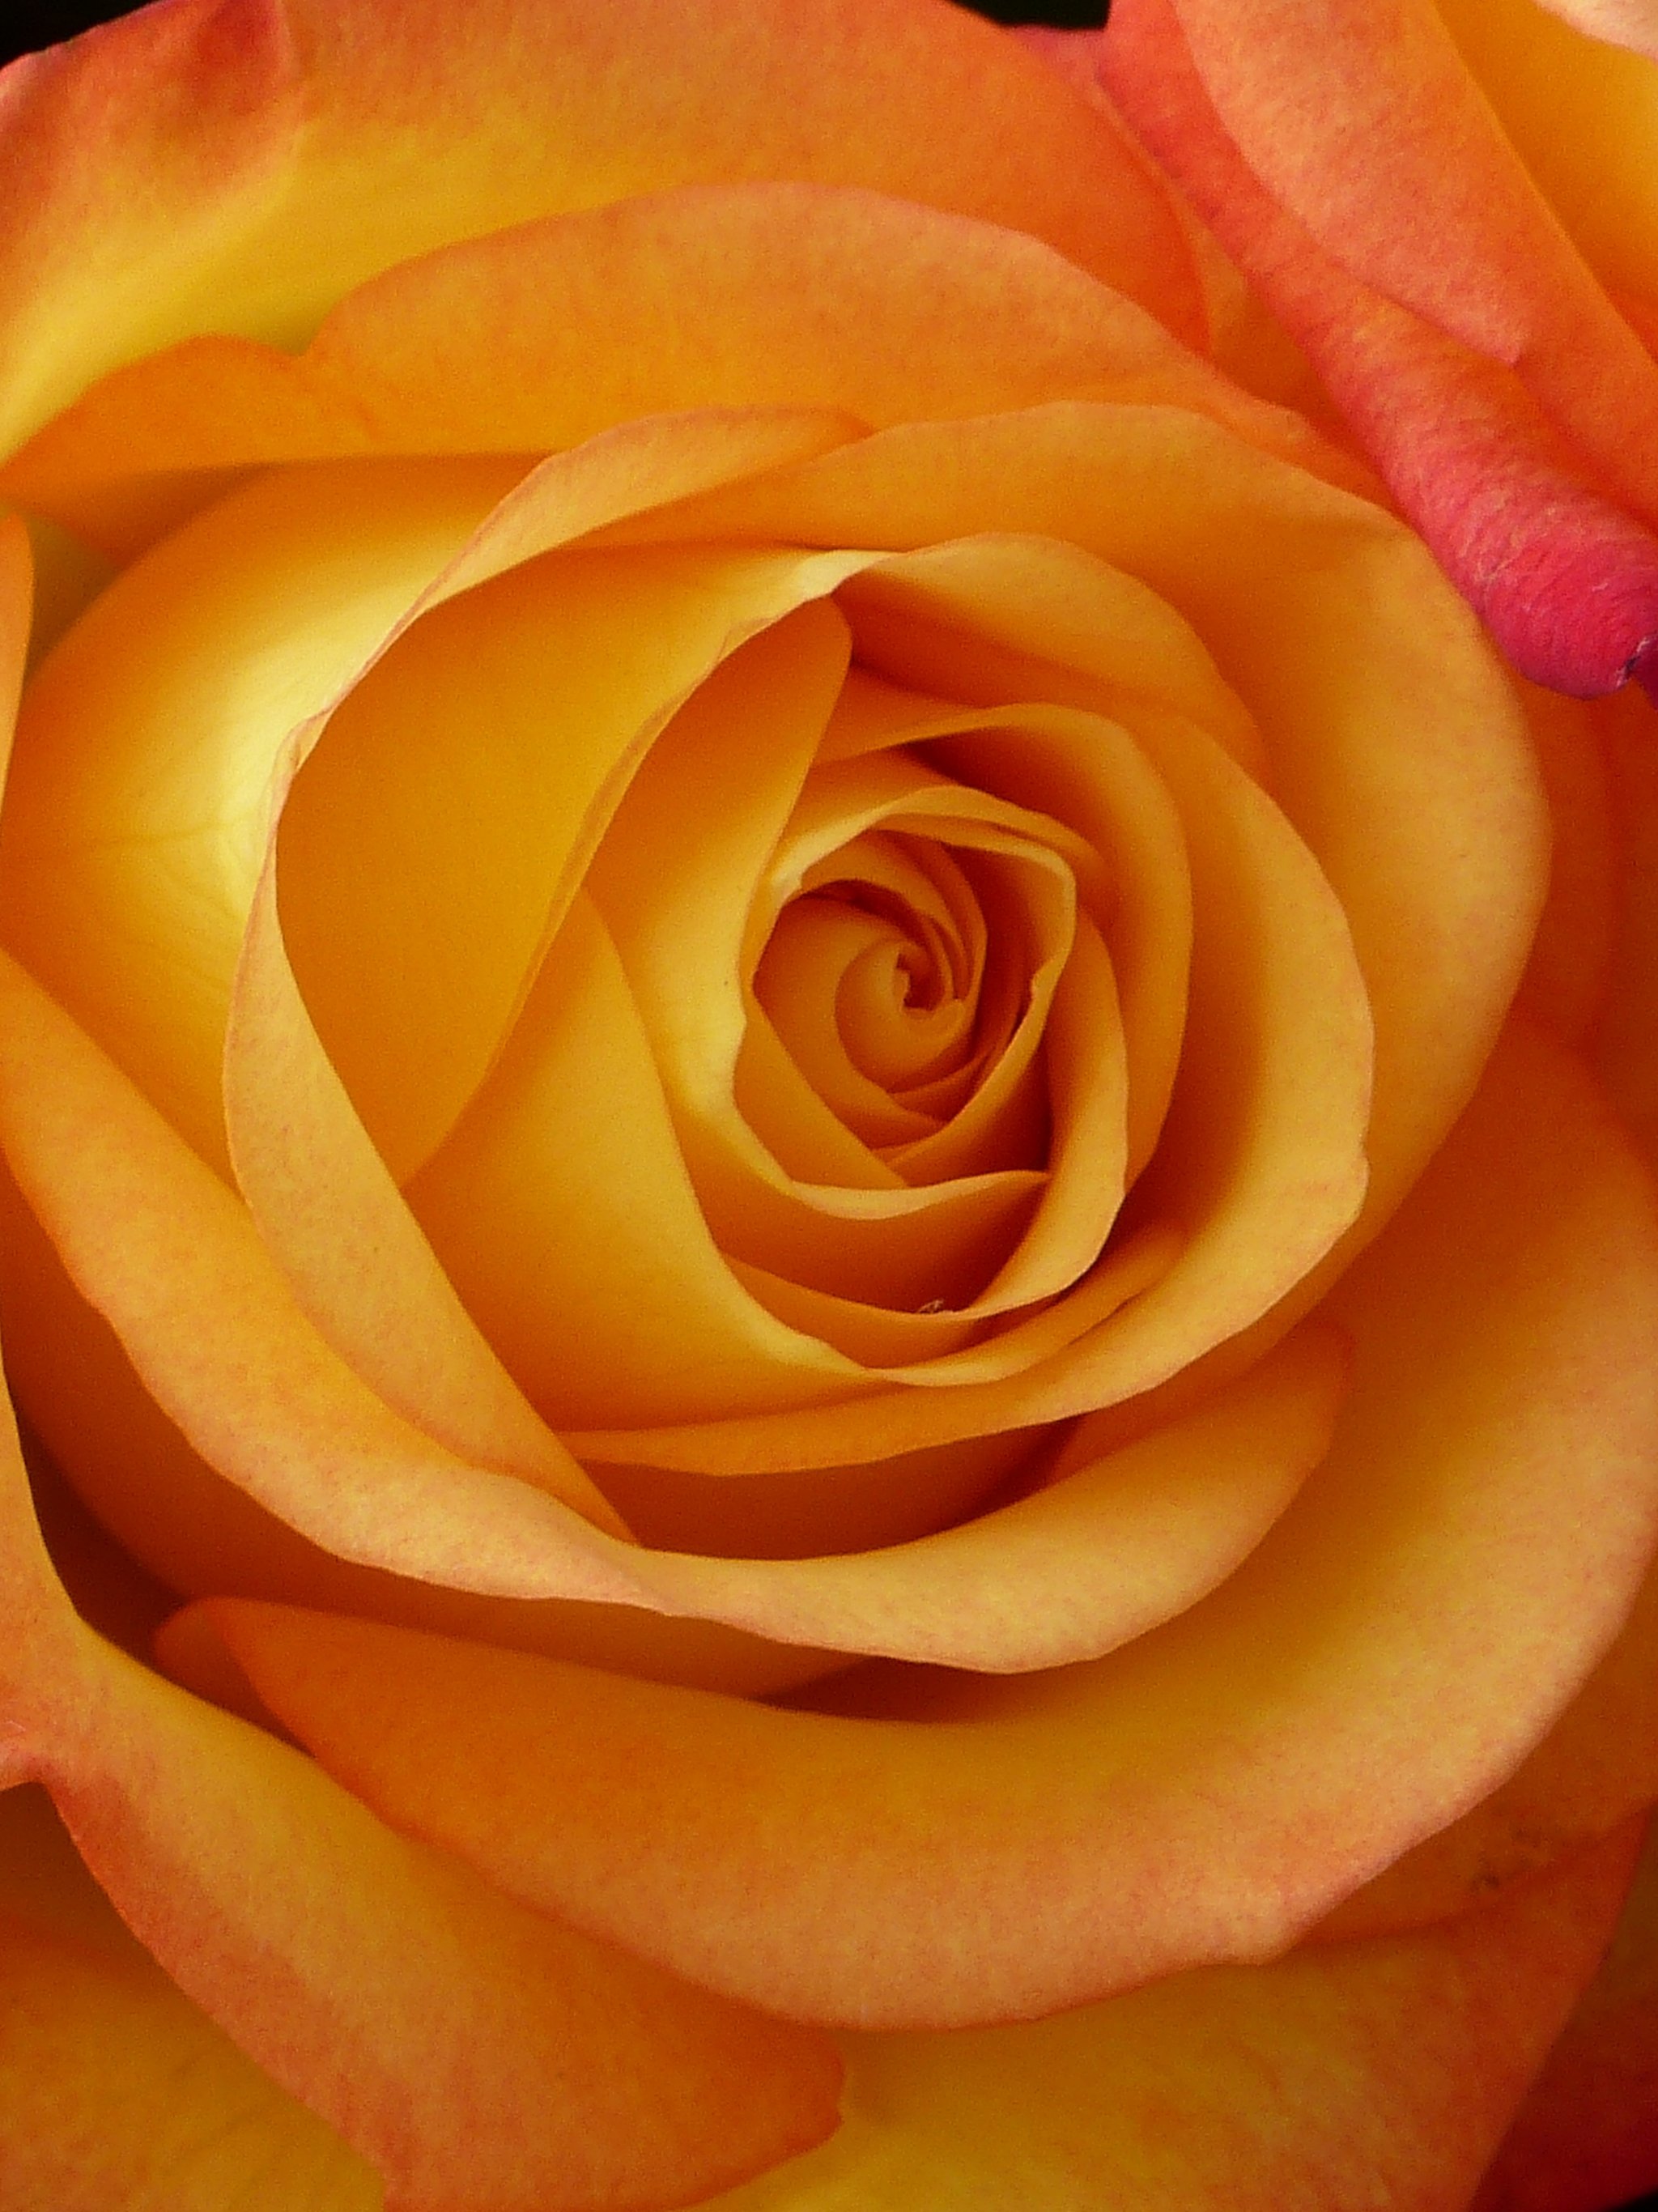 Peach Rose Wallpaper - iPhone, Android & Desktop Backgrounds